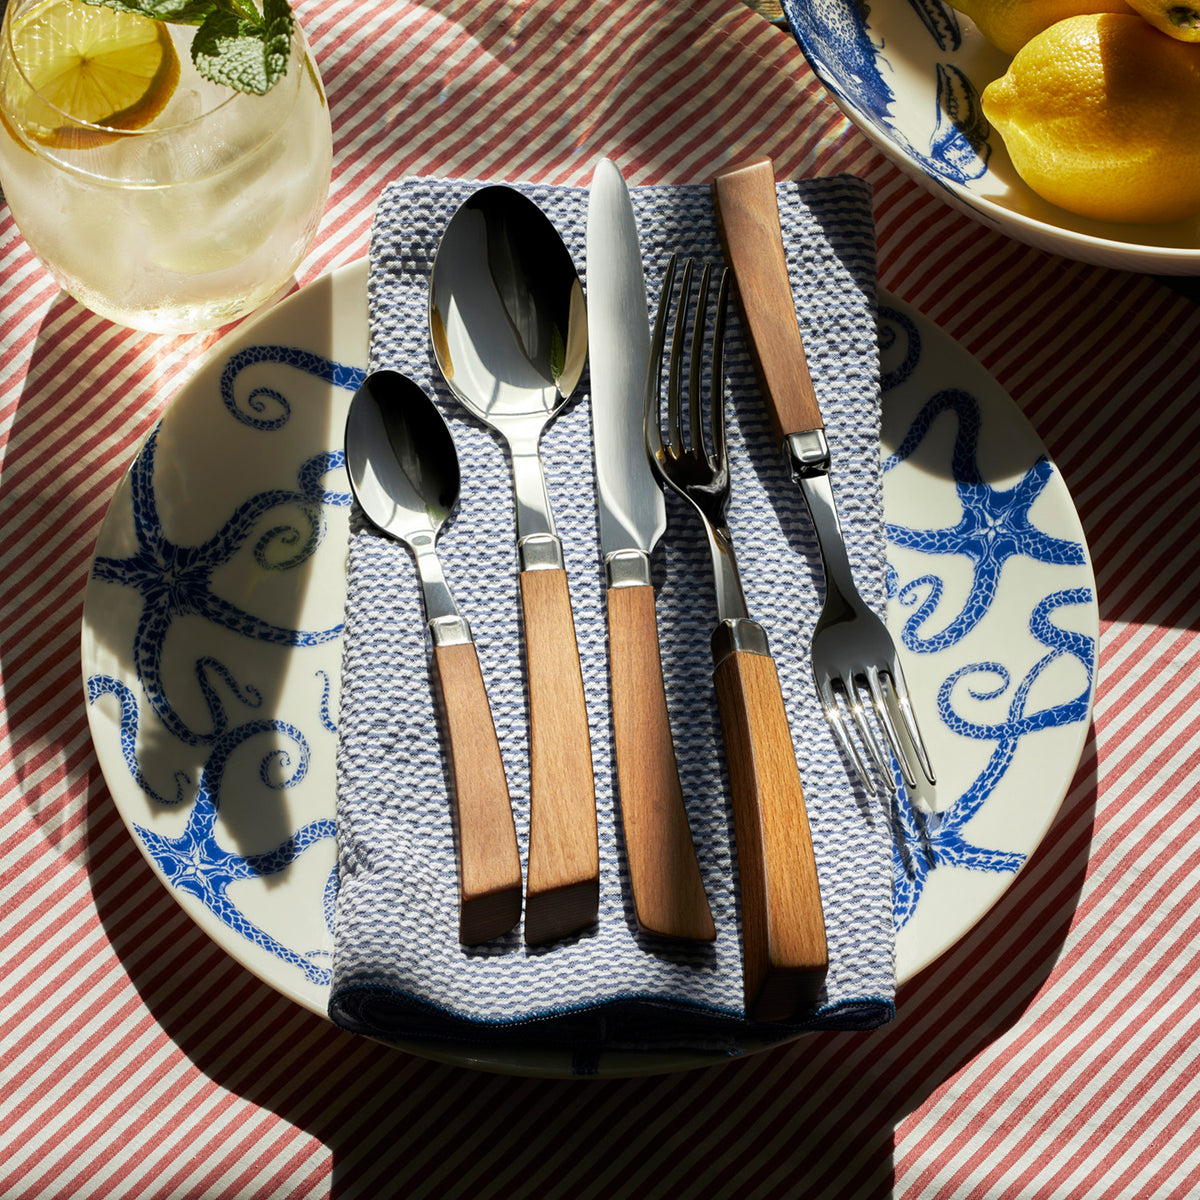 A table setting with wooden-handled cutlery on a Starfish Coupe Dinner Plate by Caskata Artisanal Home, laid on a blue towel. A drink with lemon and a bowl of lemons are also visible on a red striped tablecloth, creating a charming coastal vibe reminiscent of starfish-dotted shores.